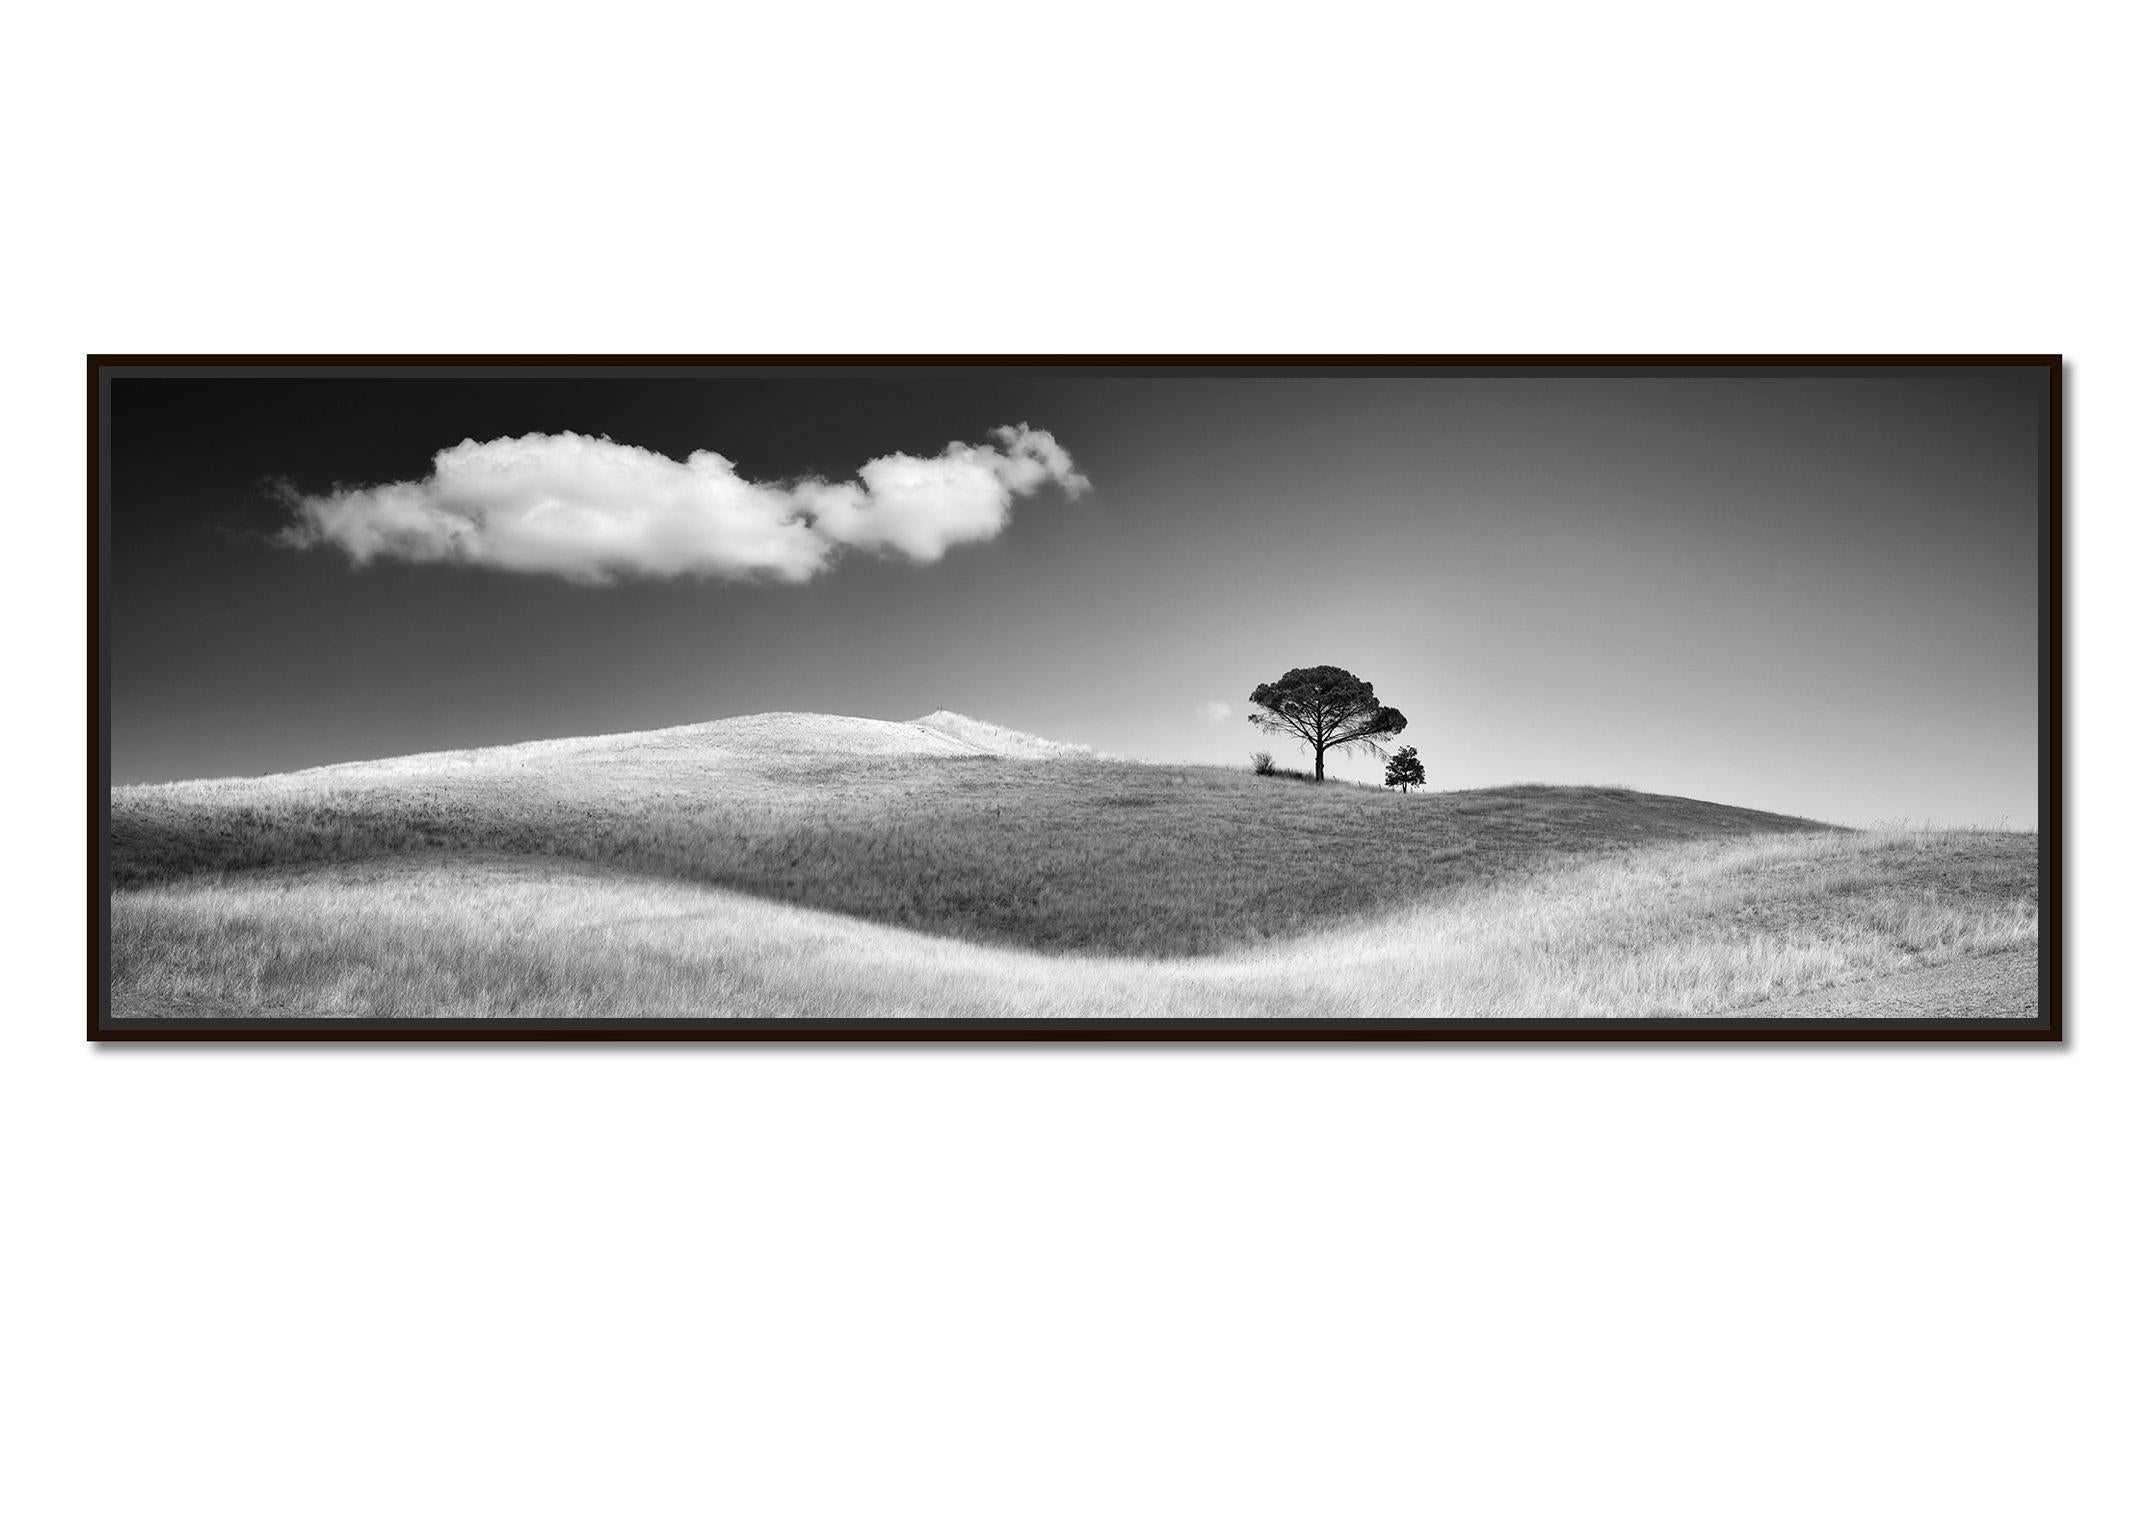 Italian Stone Pines, Tuscany, Italy, black and white photography, art landscape - Photograph by Gerald Berghammer